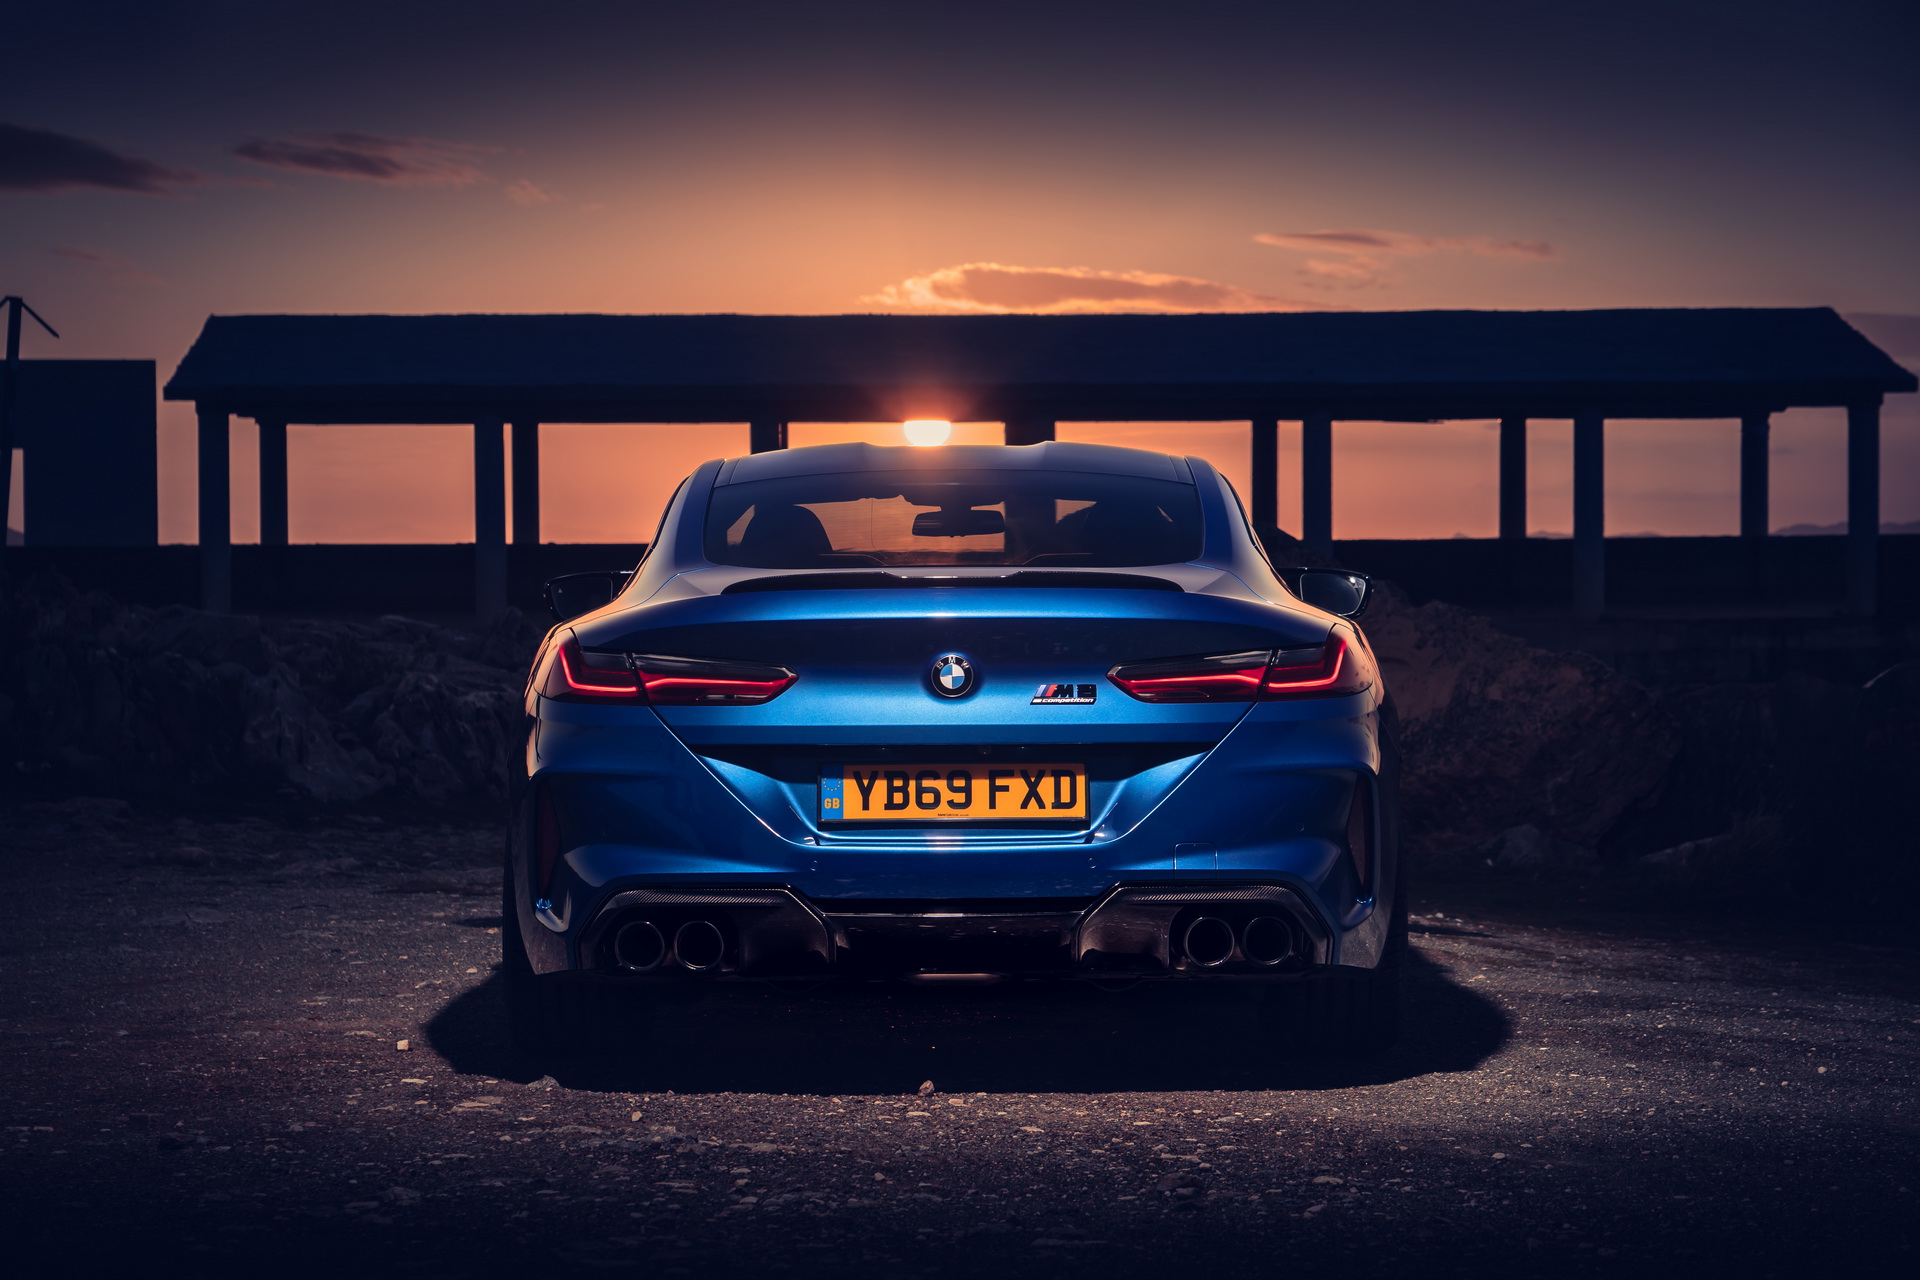 Bmw M8 Competition Coupe And Convertible Arrive In The Uk Starting From 123 435 Carscoops